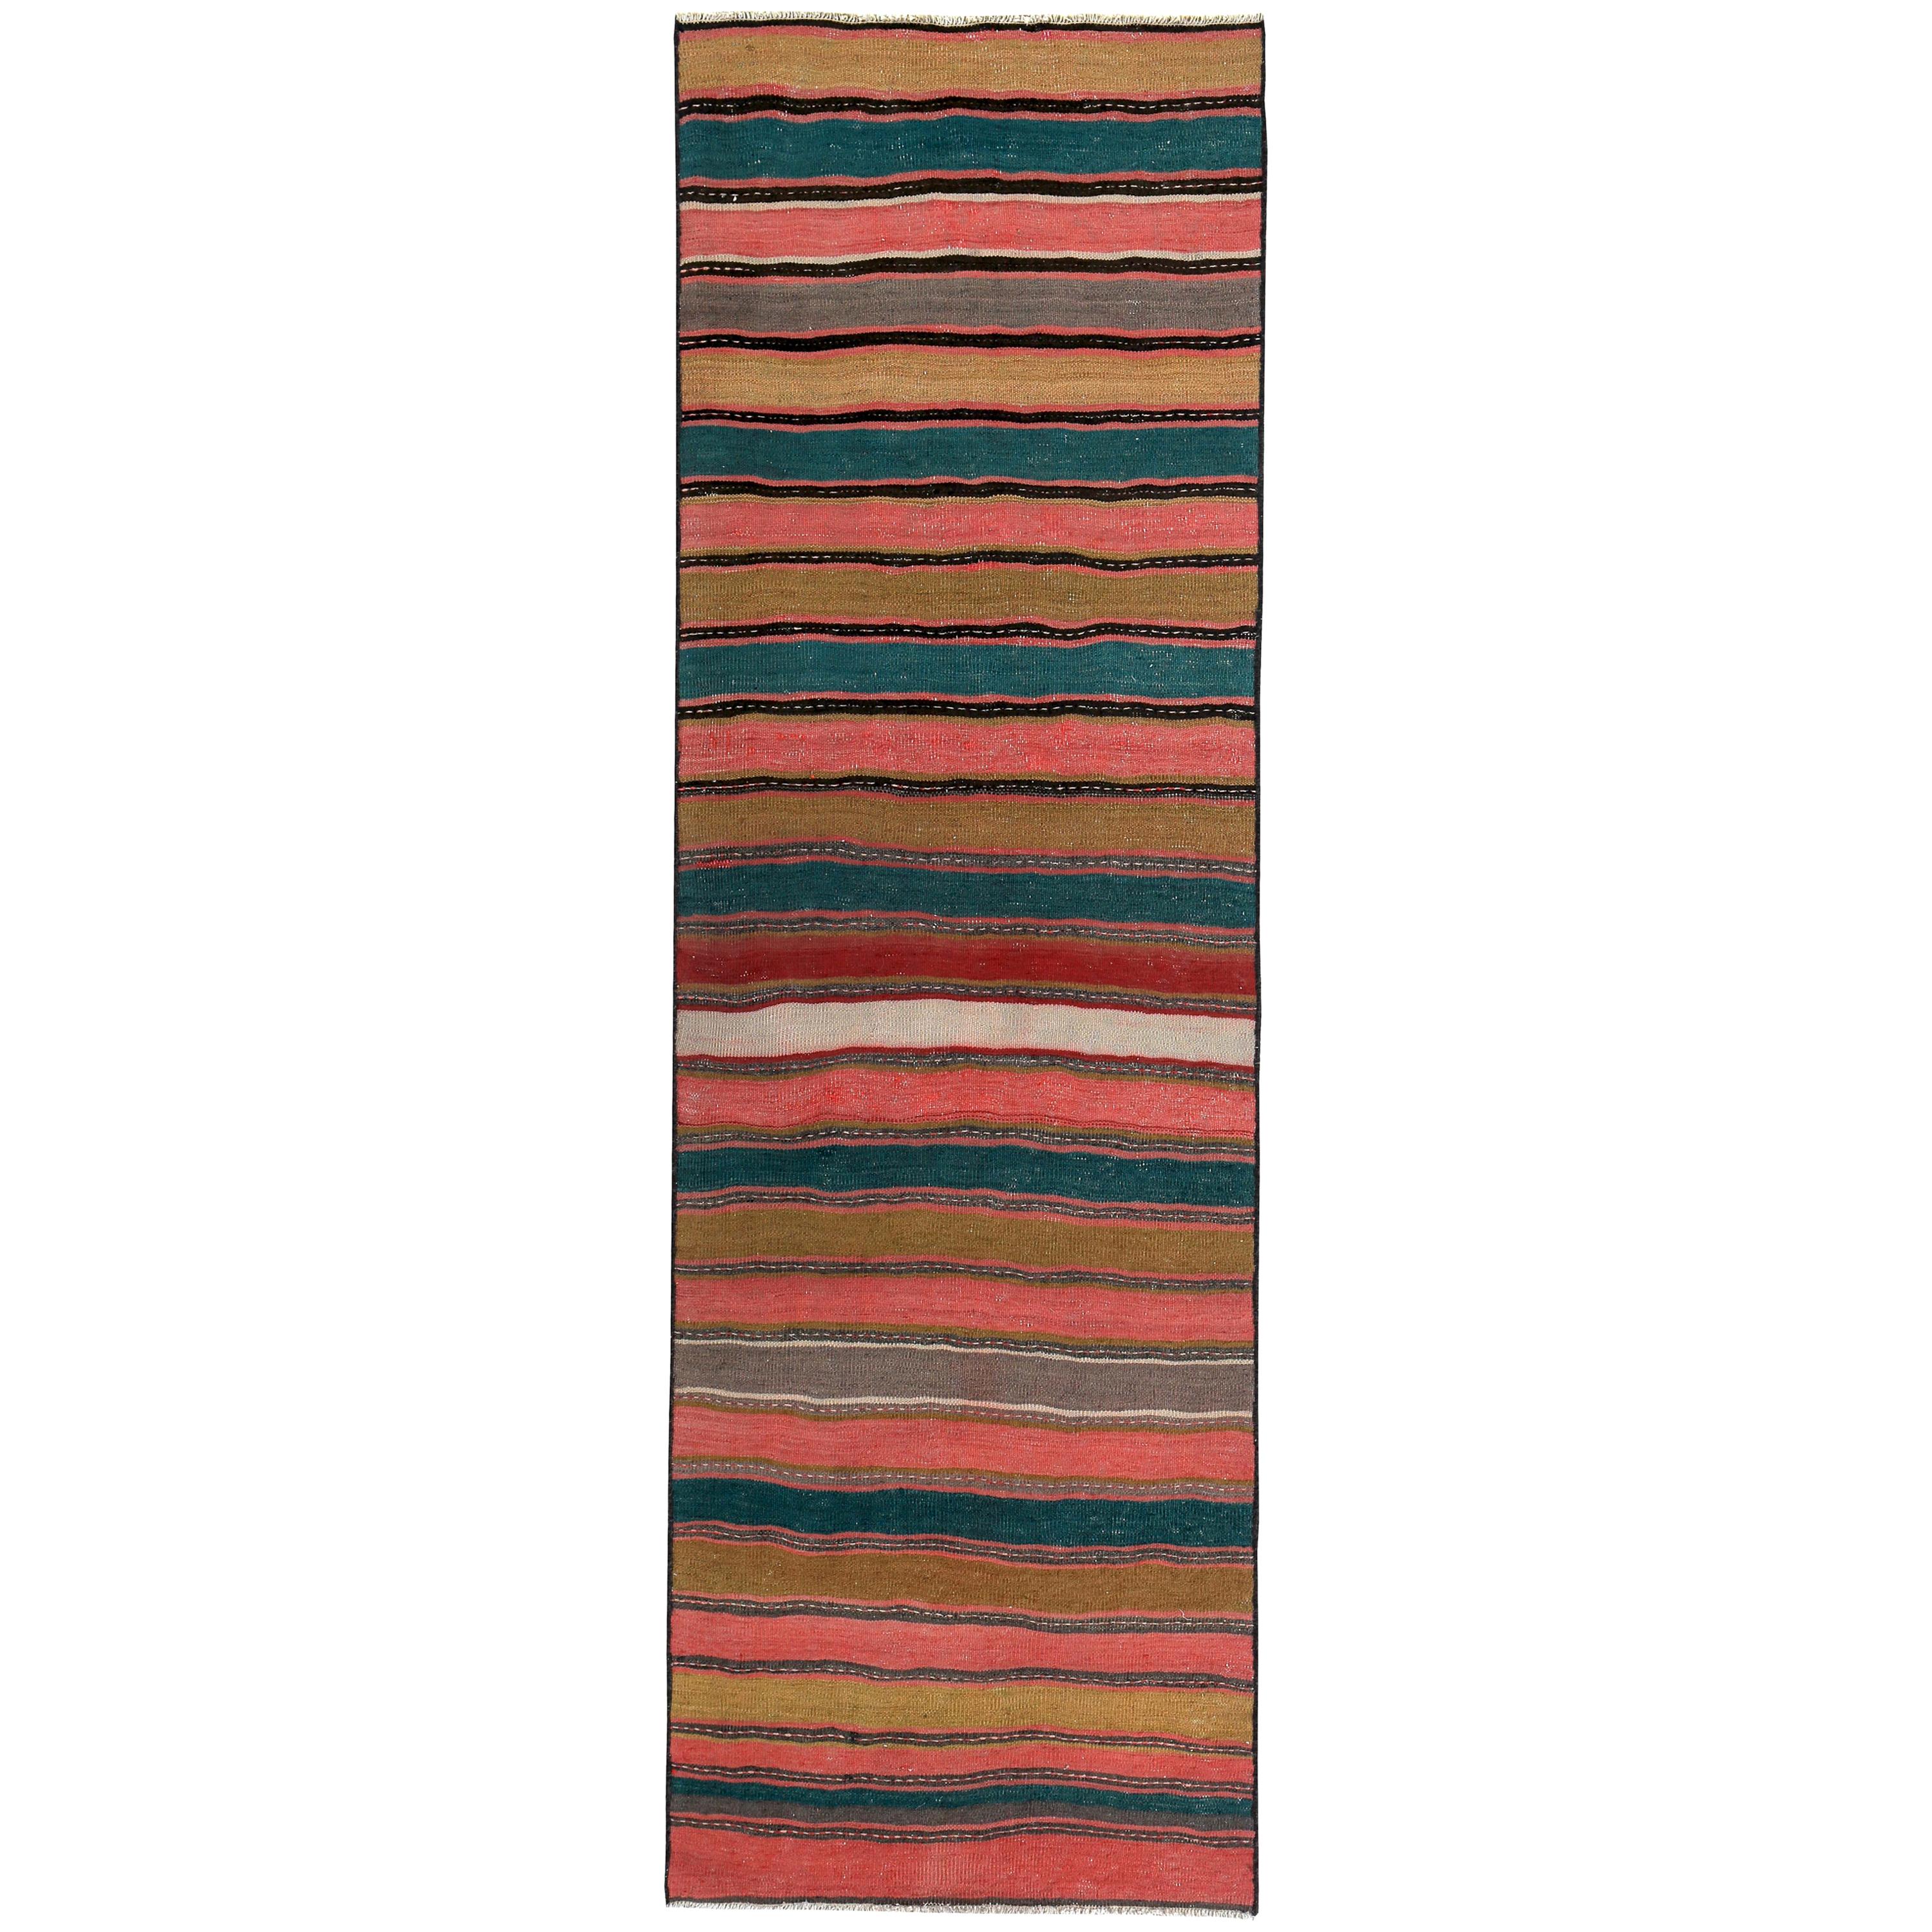 Modern Turkish Kilim Runner Rug with Green, Red and Brown Stripes